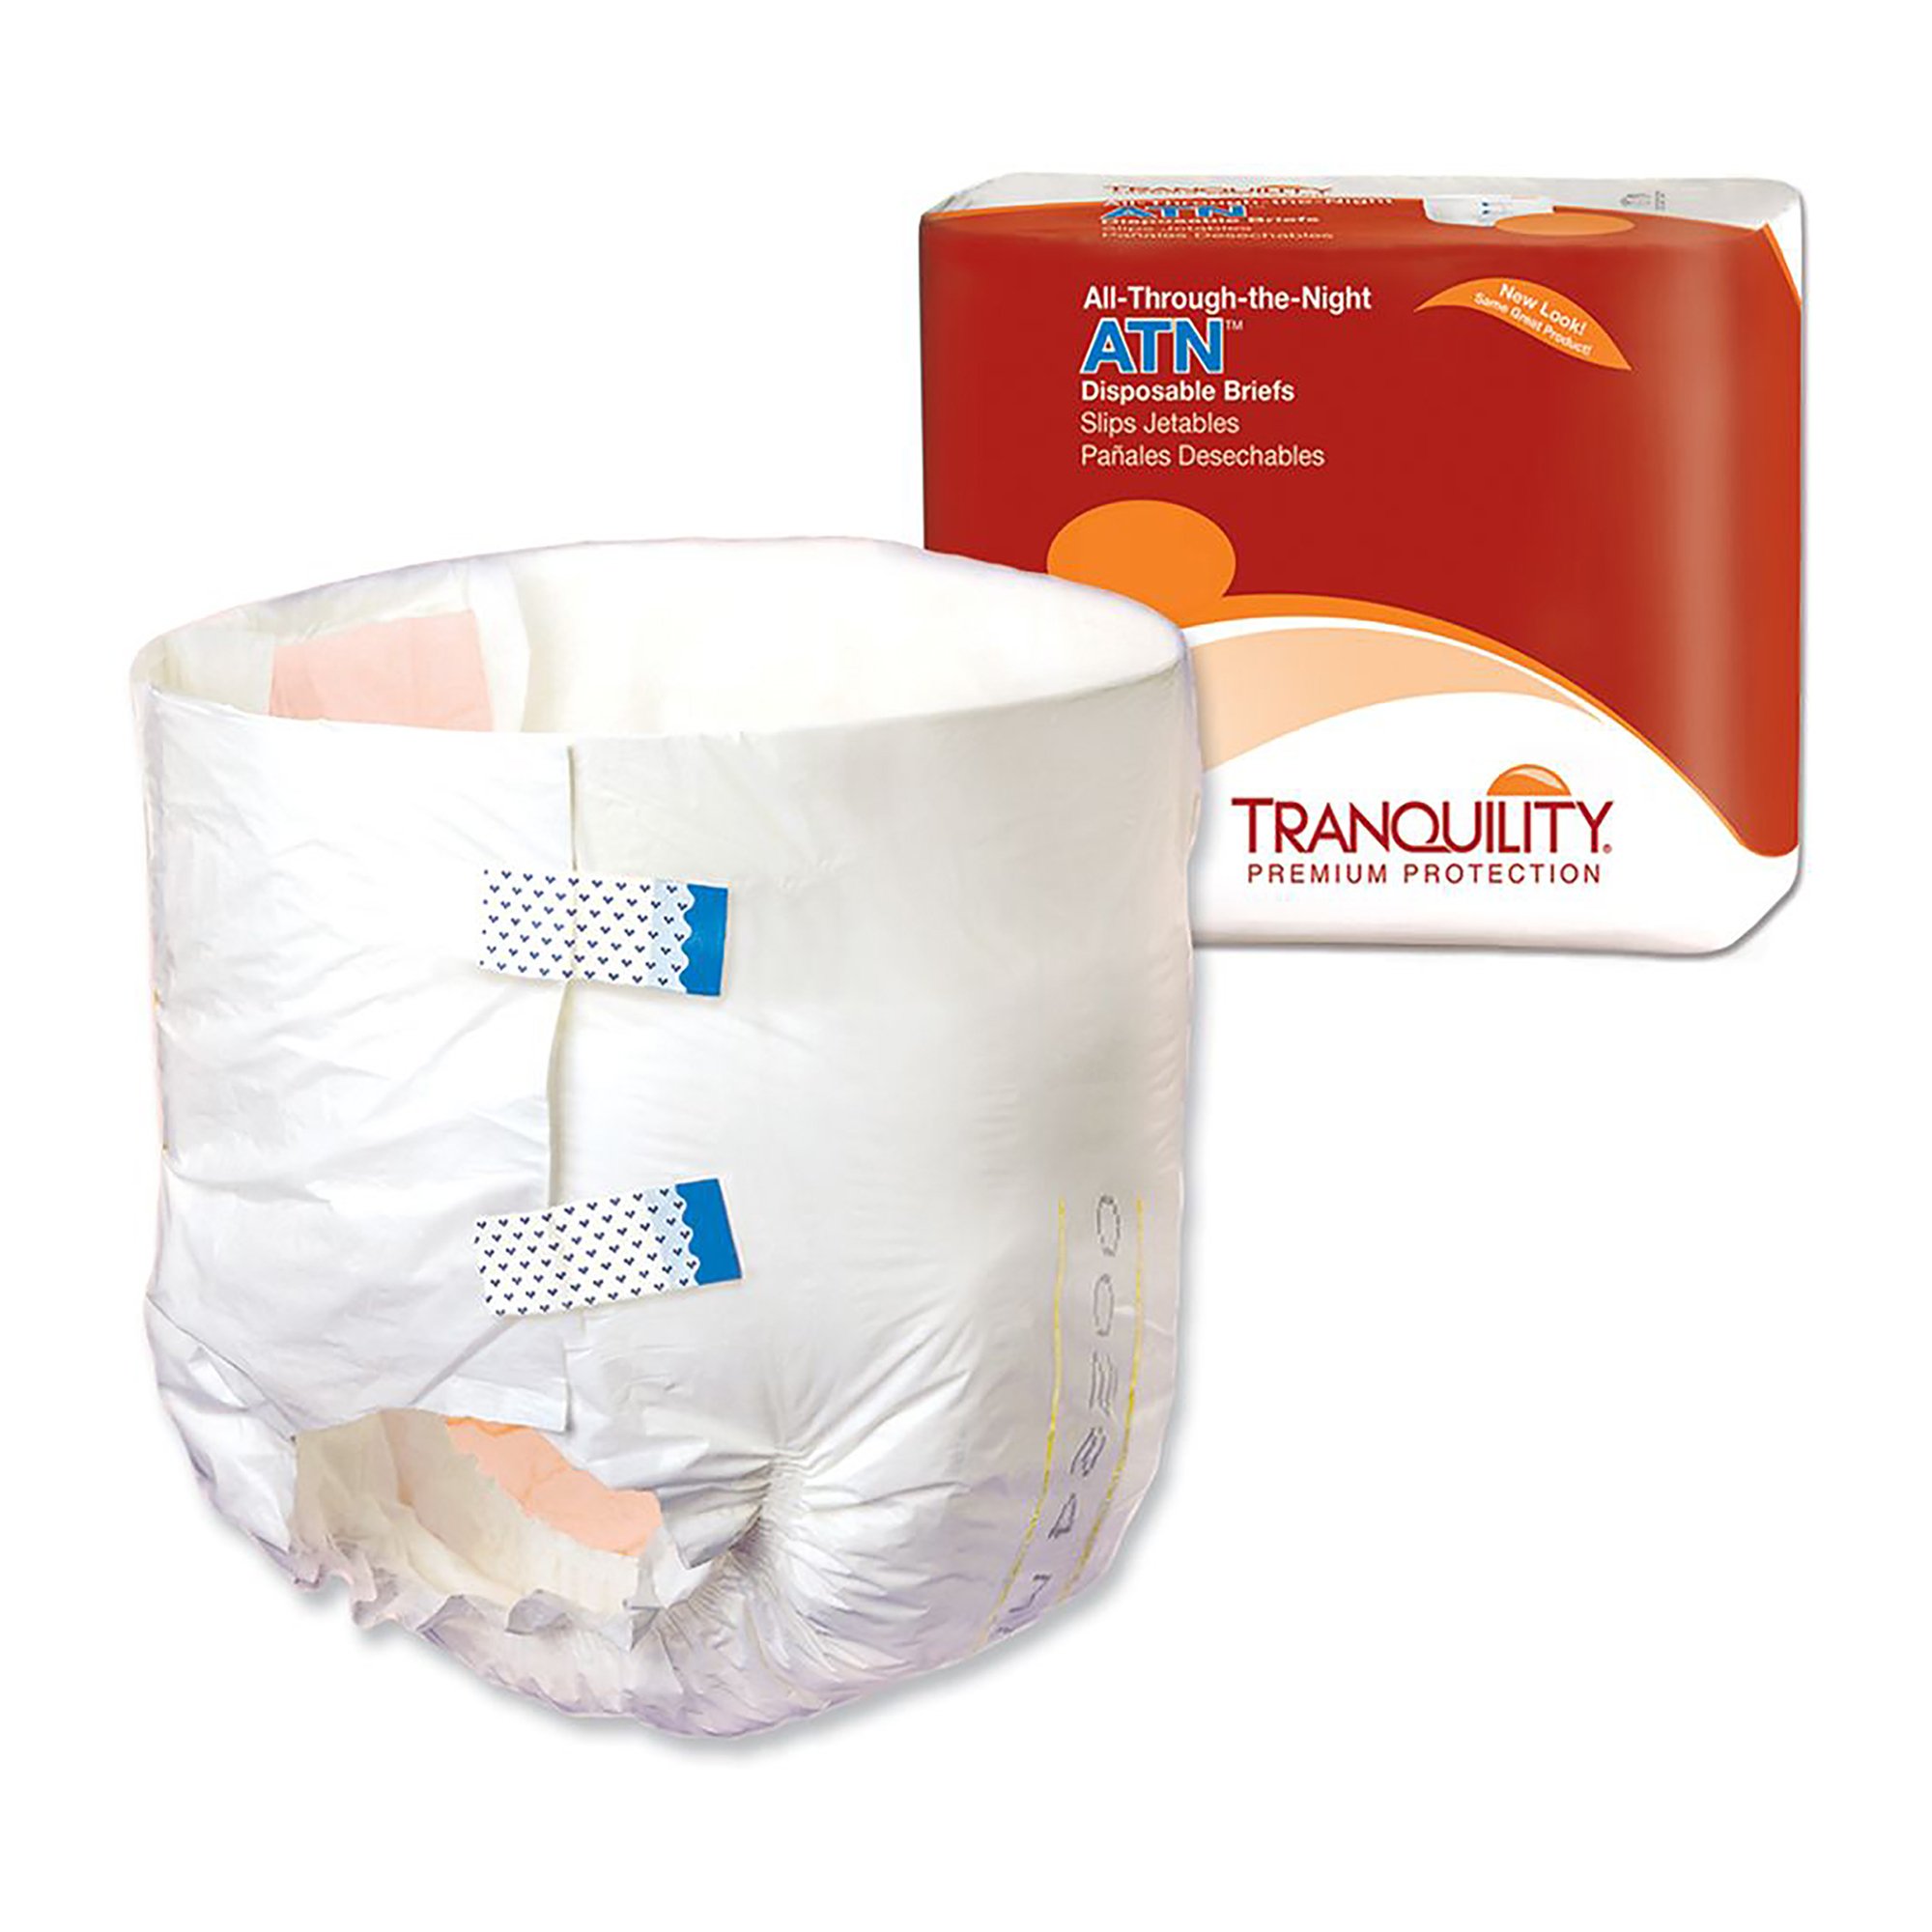 Tranquility ATN Incontinence Brief, Large